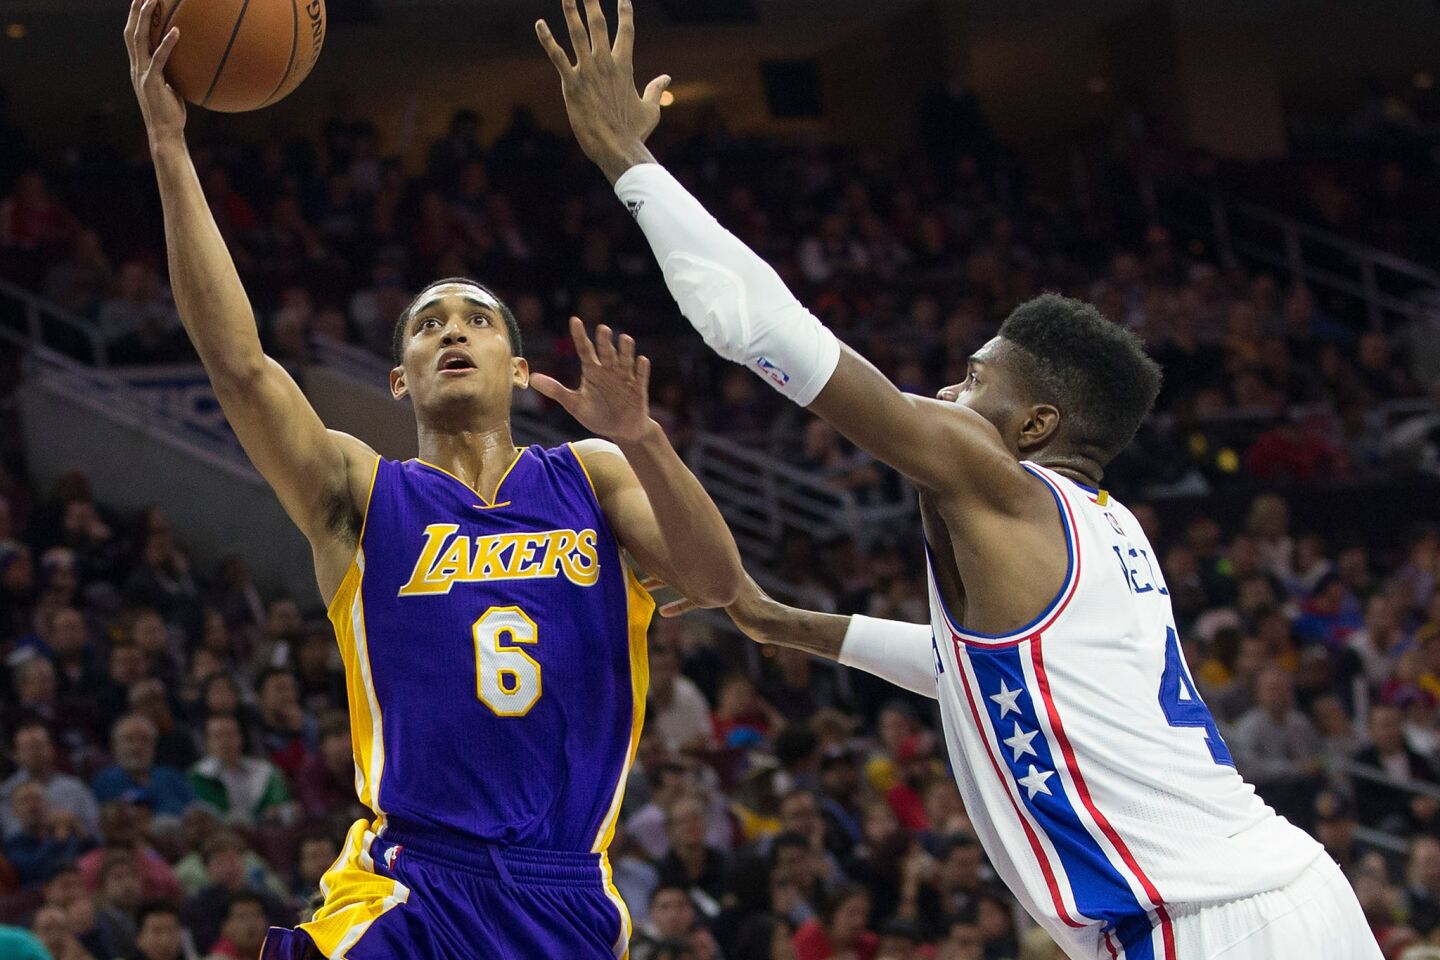 Lakers may benefit by matching a Jordan Clarkson offer sheet this summer